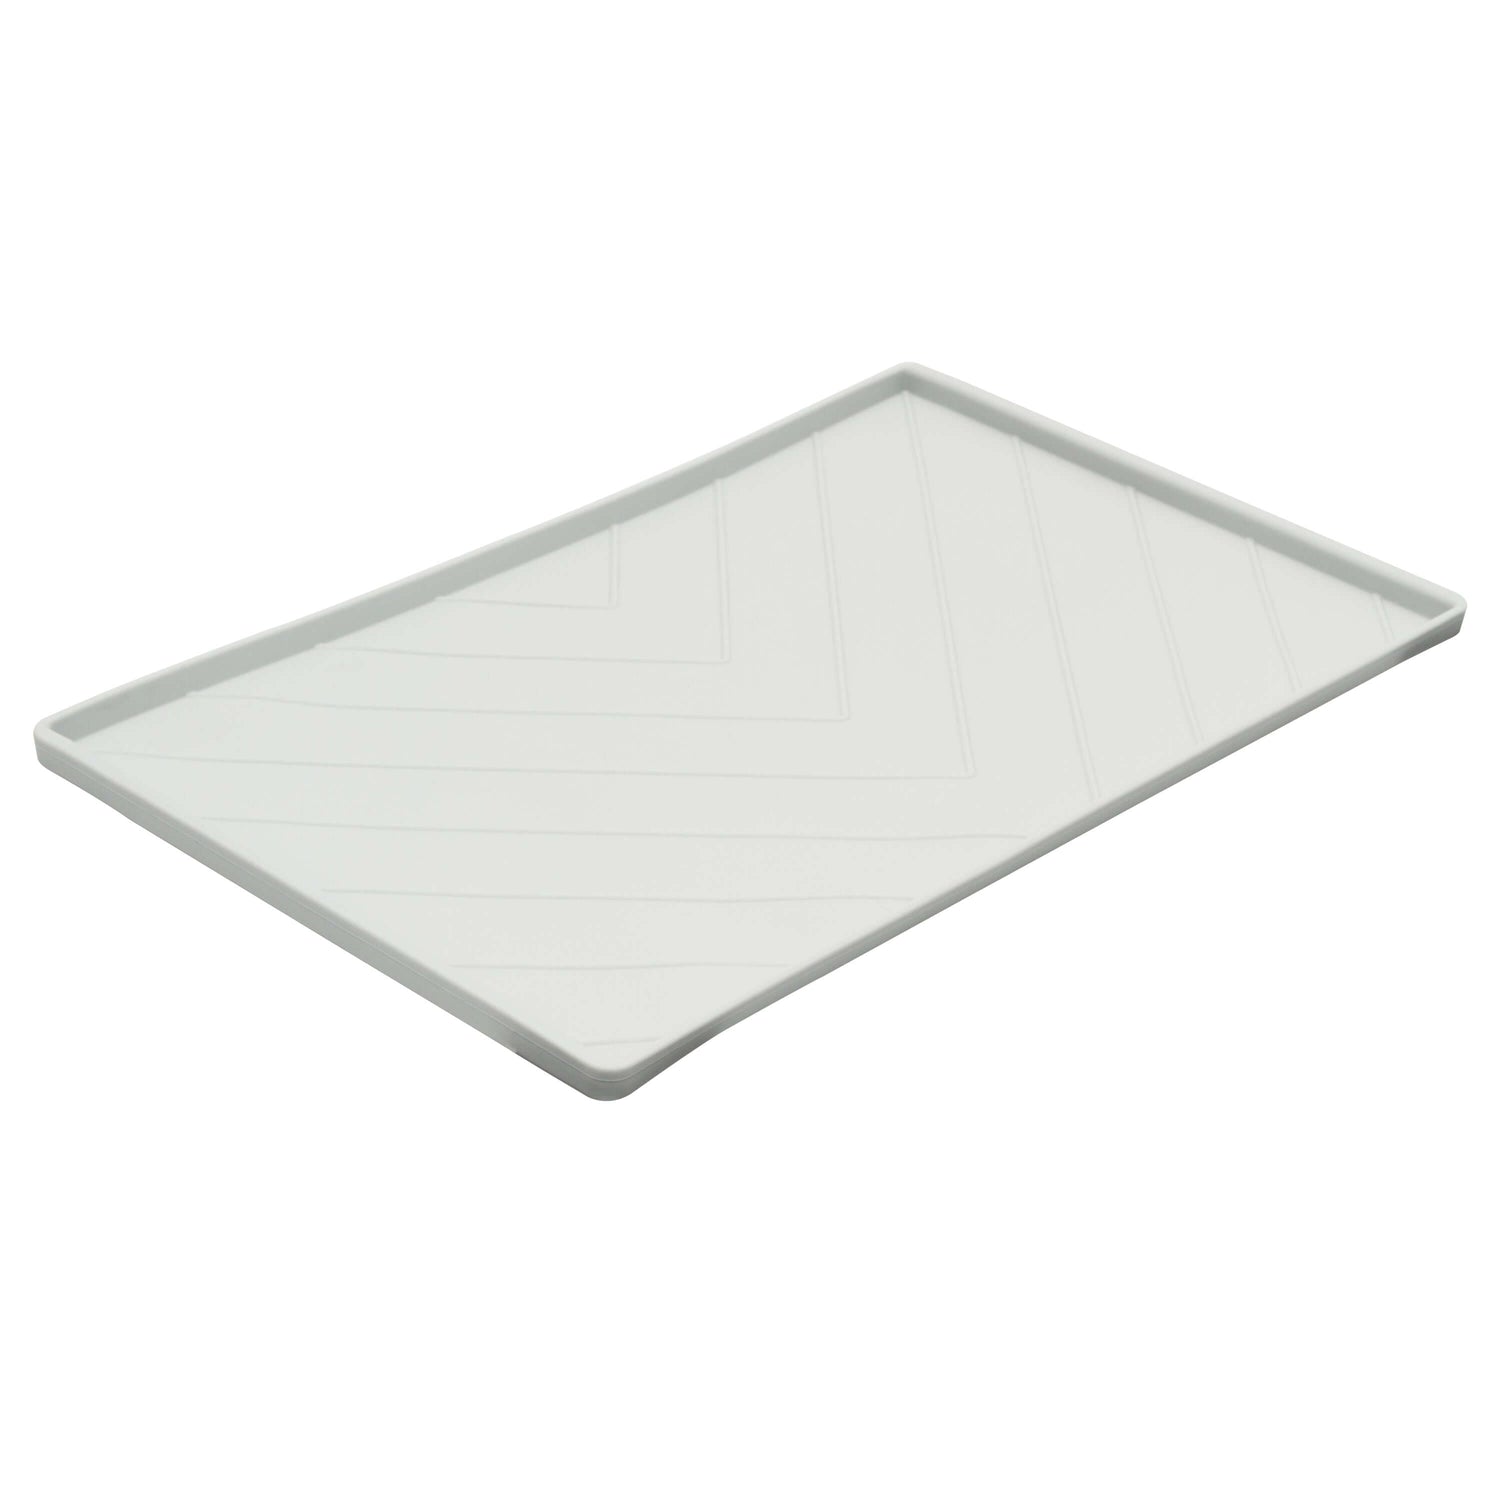 Light grey pet bowl mat.  Reinforced sides to carry with ease.